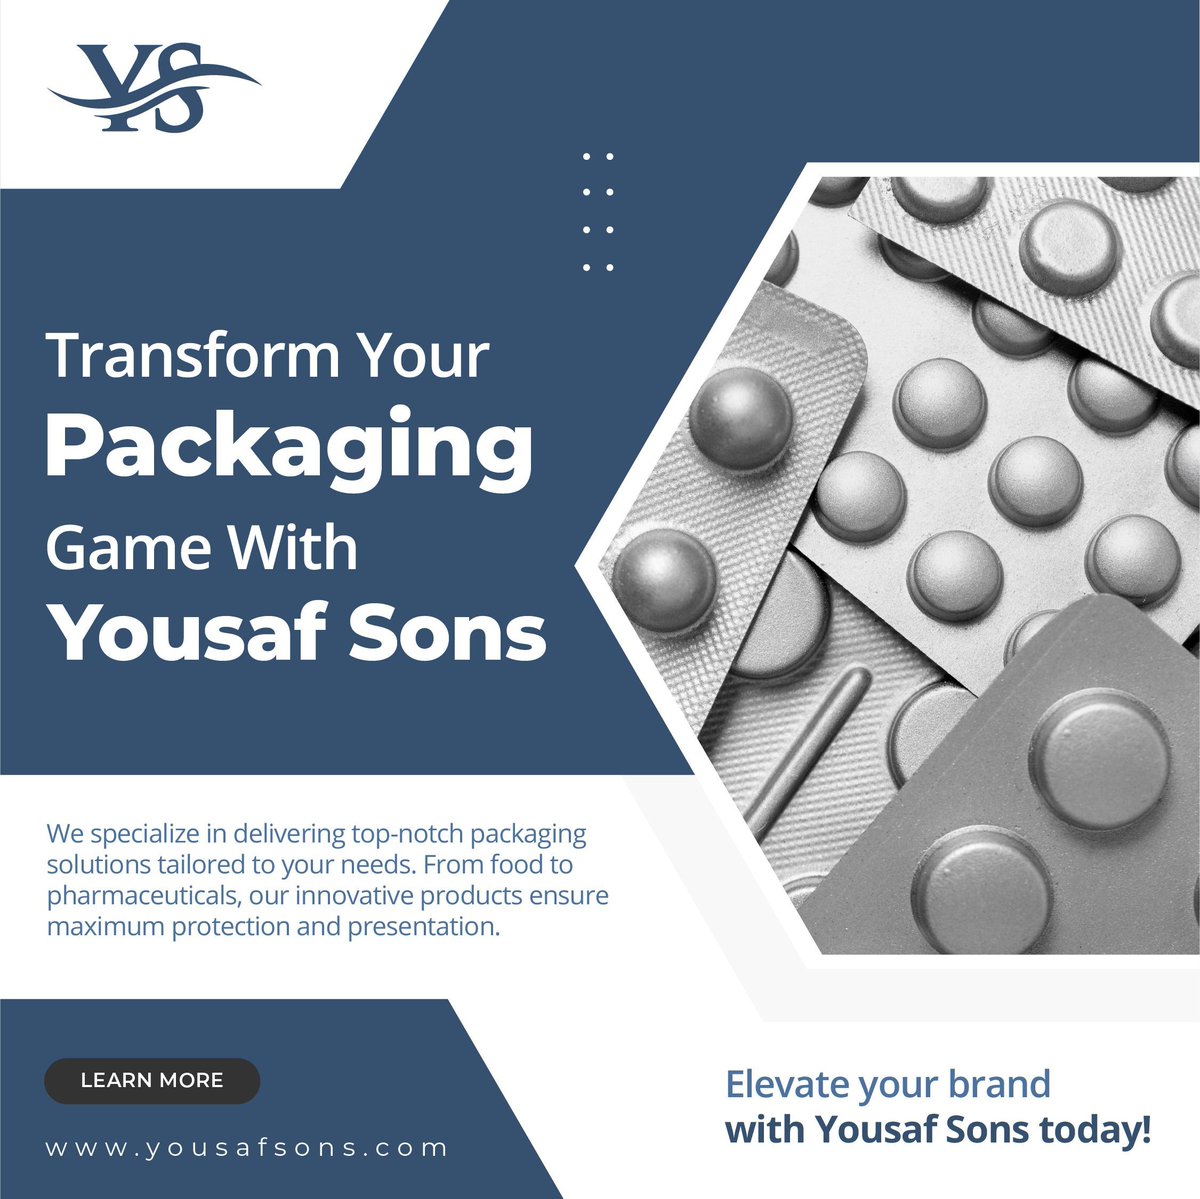 Transform your packaging game with Yousaf Sons! 🌟 We specialize in delivering top-notch packaging solutions tailored to your needs. #YousafSons #PackagingSolutions #Innovation #Quality #ElevateYourBrand #FoodPackaging #PharmaceuticalPackaging